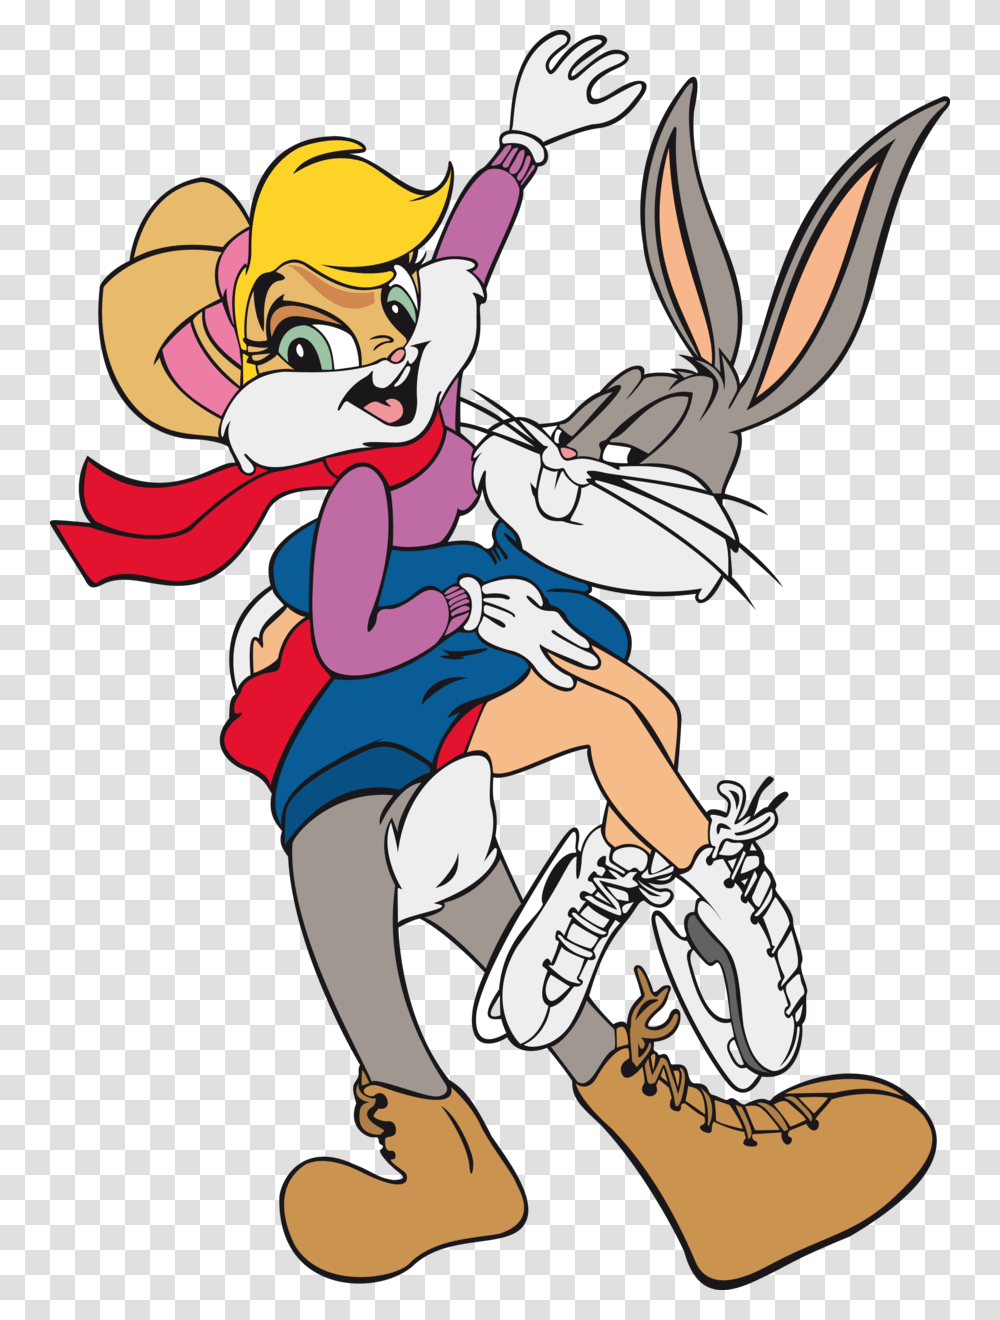 Bugs Bunny And Lola Bunny Pictures Bugs Bunny And Lola Bunny, Comics, Book, Manga, Costume Transparent Png